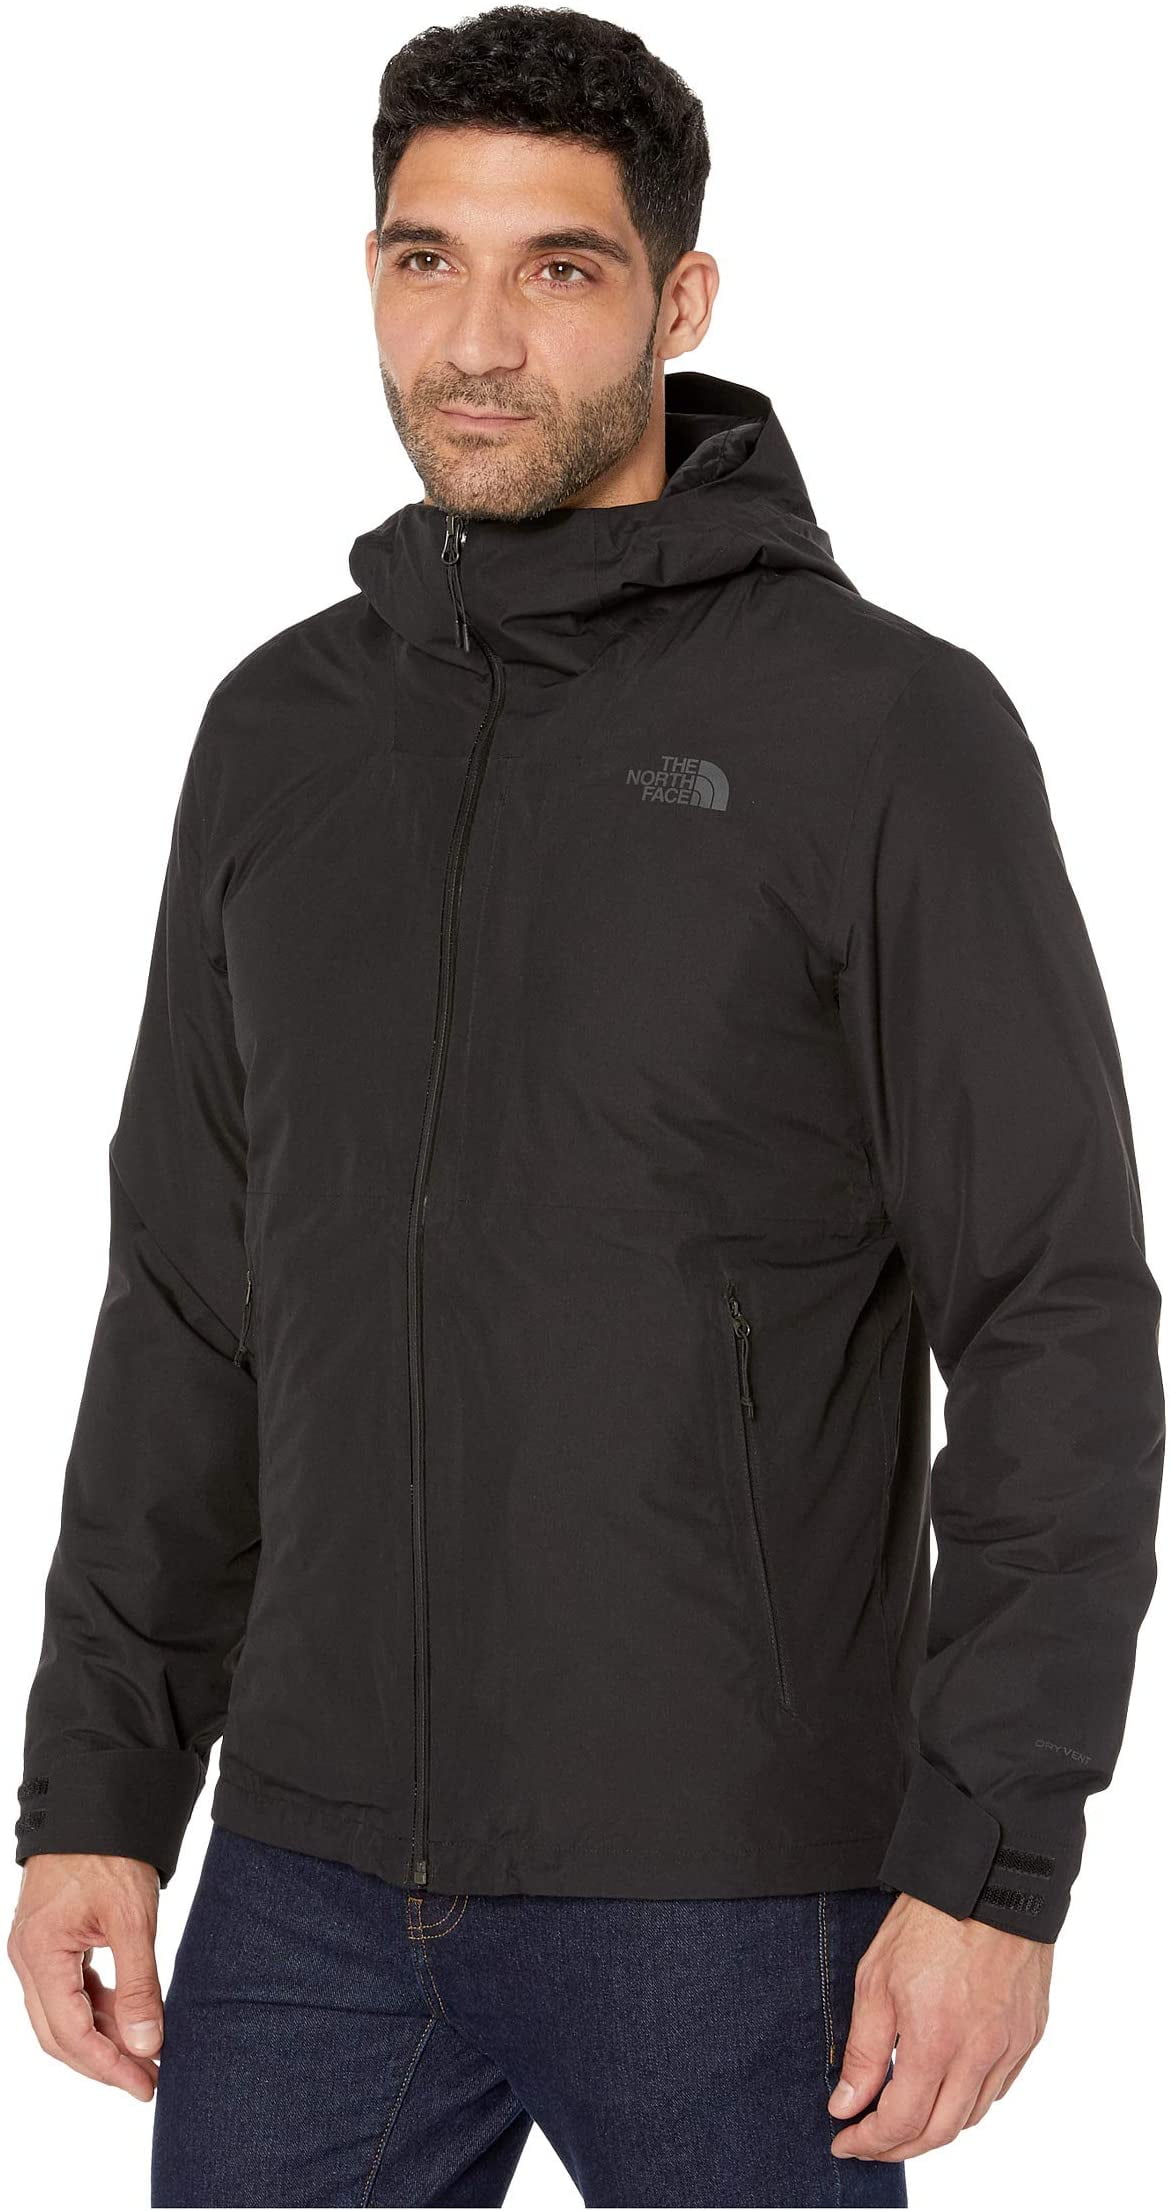 the north face men's inlux insulated